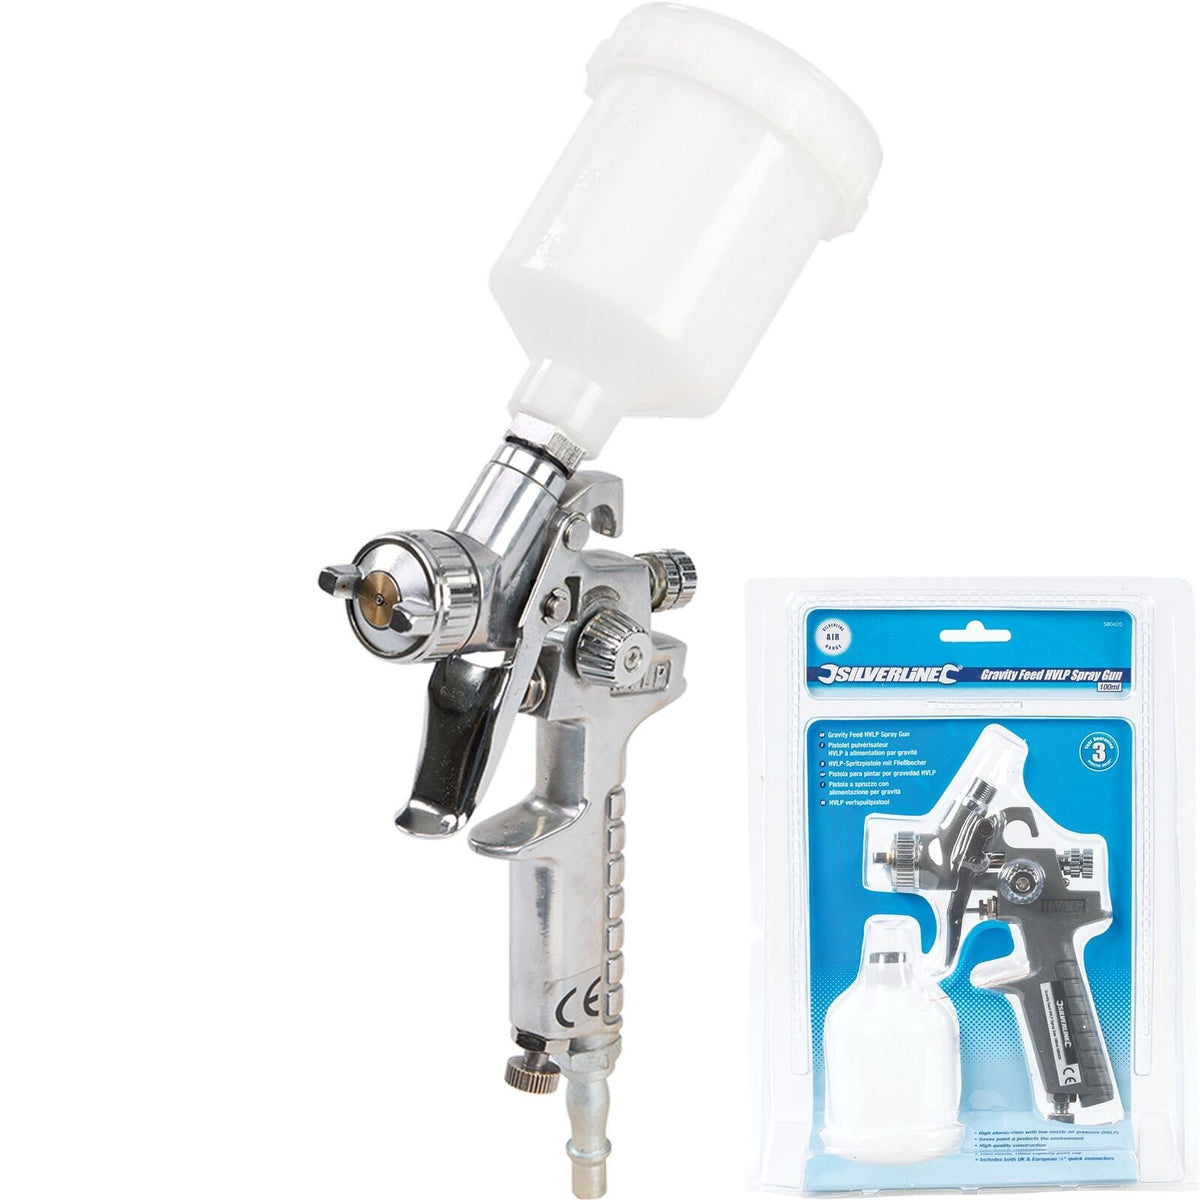 Bluespot HVLP Gravity Feed Air Paint Spray Gun 100ml Cup With 1mm Nozzle